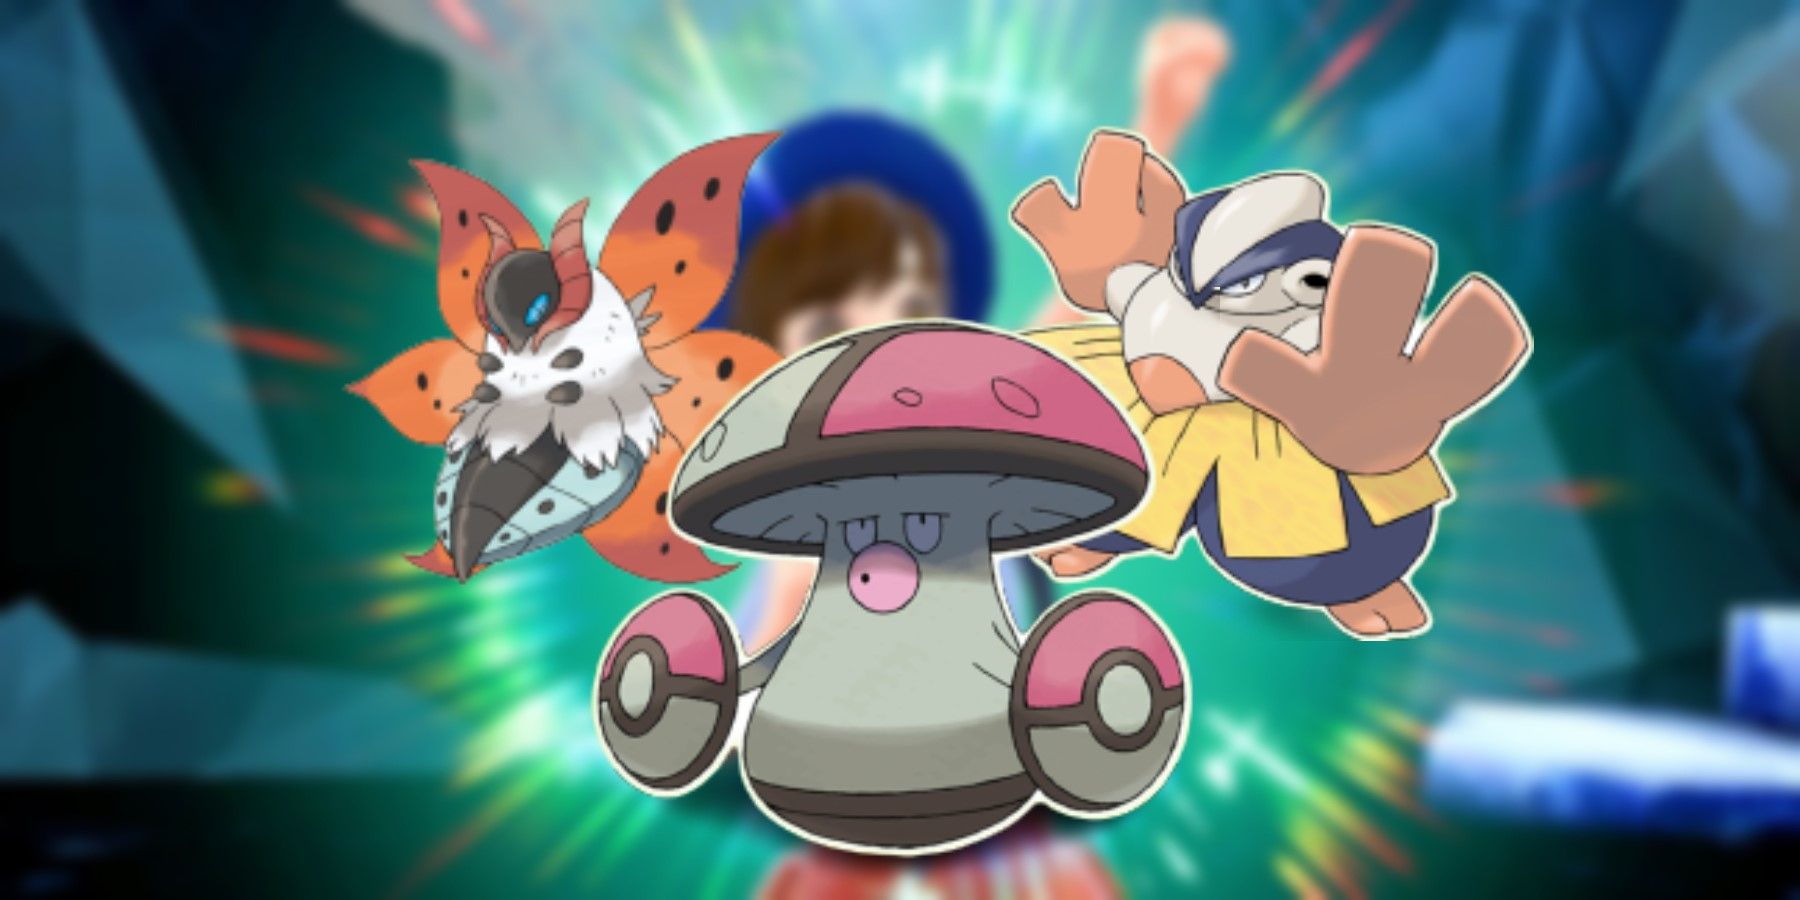 What are Paradox Forms in Pokemon Scarlet & Violet?